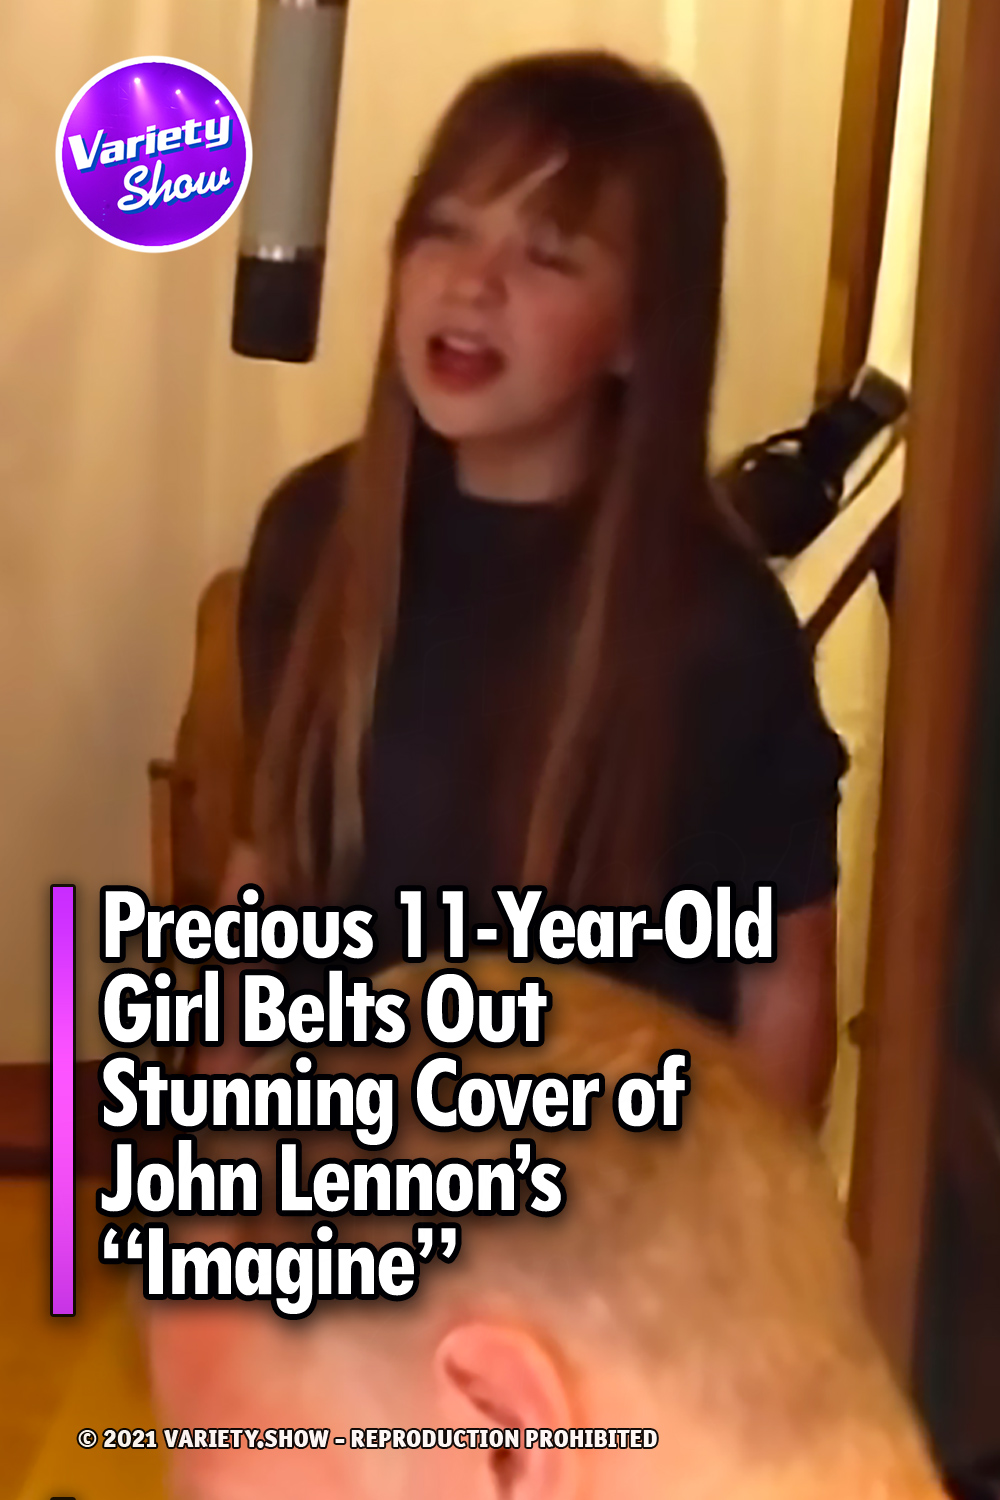 Precious 11-Year-Old Girl Belts Out Stunning Cover of John Lennon’s “Imagine”